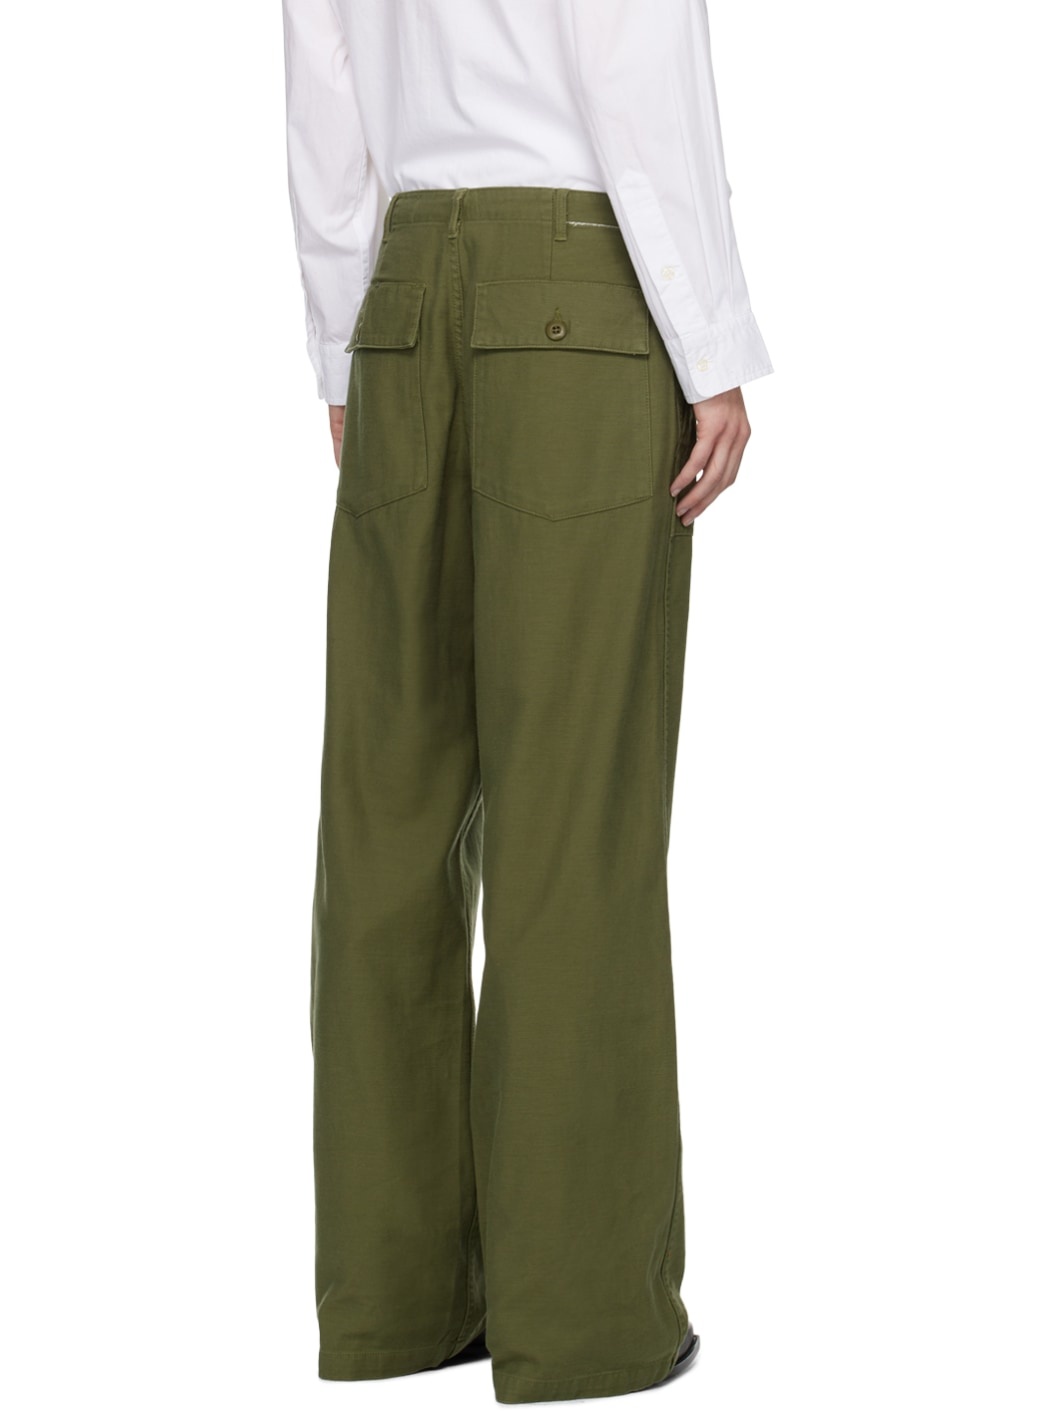 Green Utility Trousers - 3